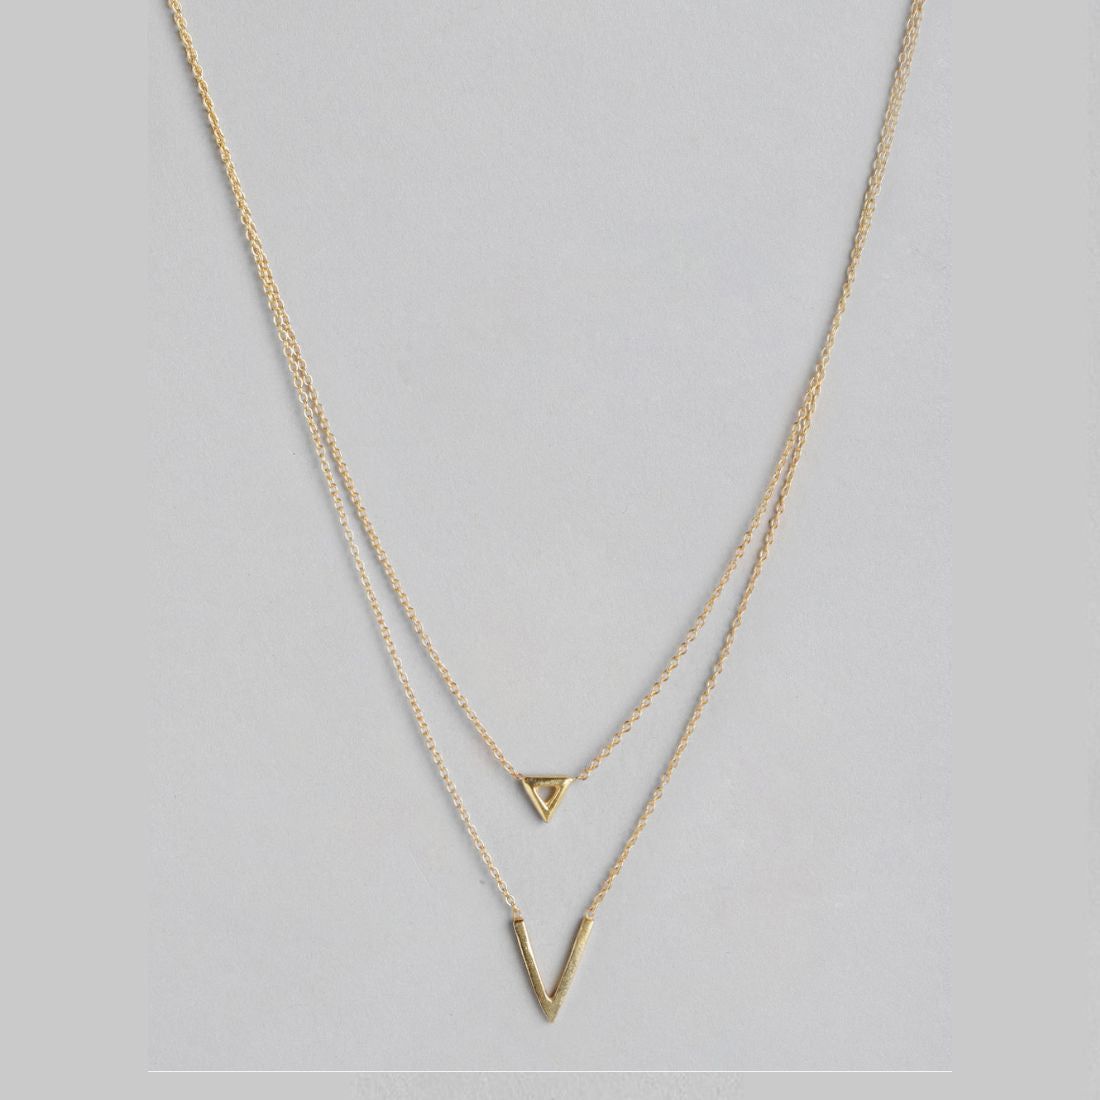 Triangular Gleam 925 Sterling Silver Gold-Plated Link Chain Necklace